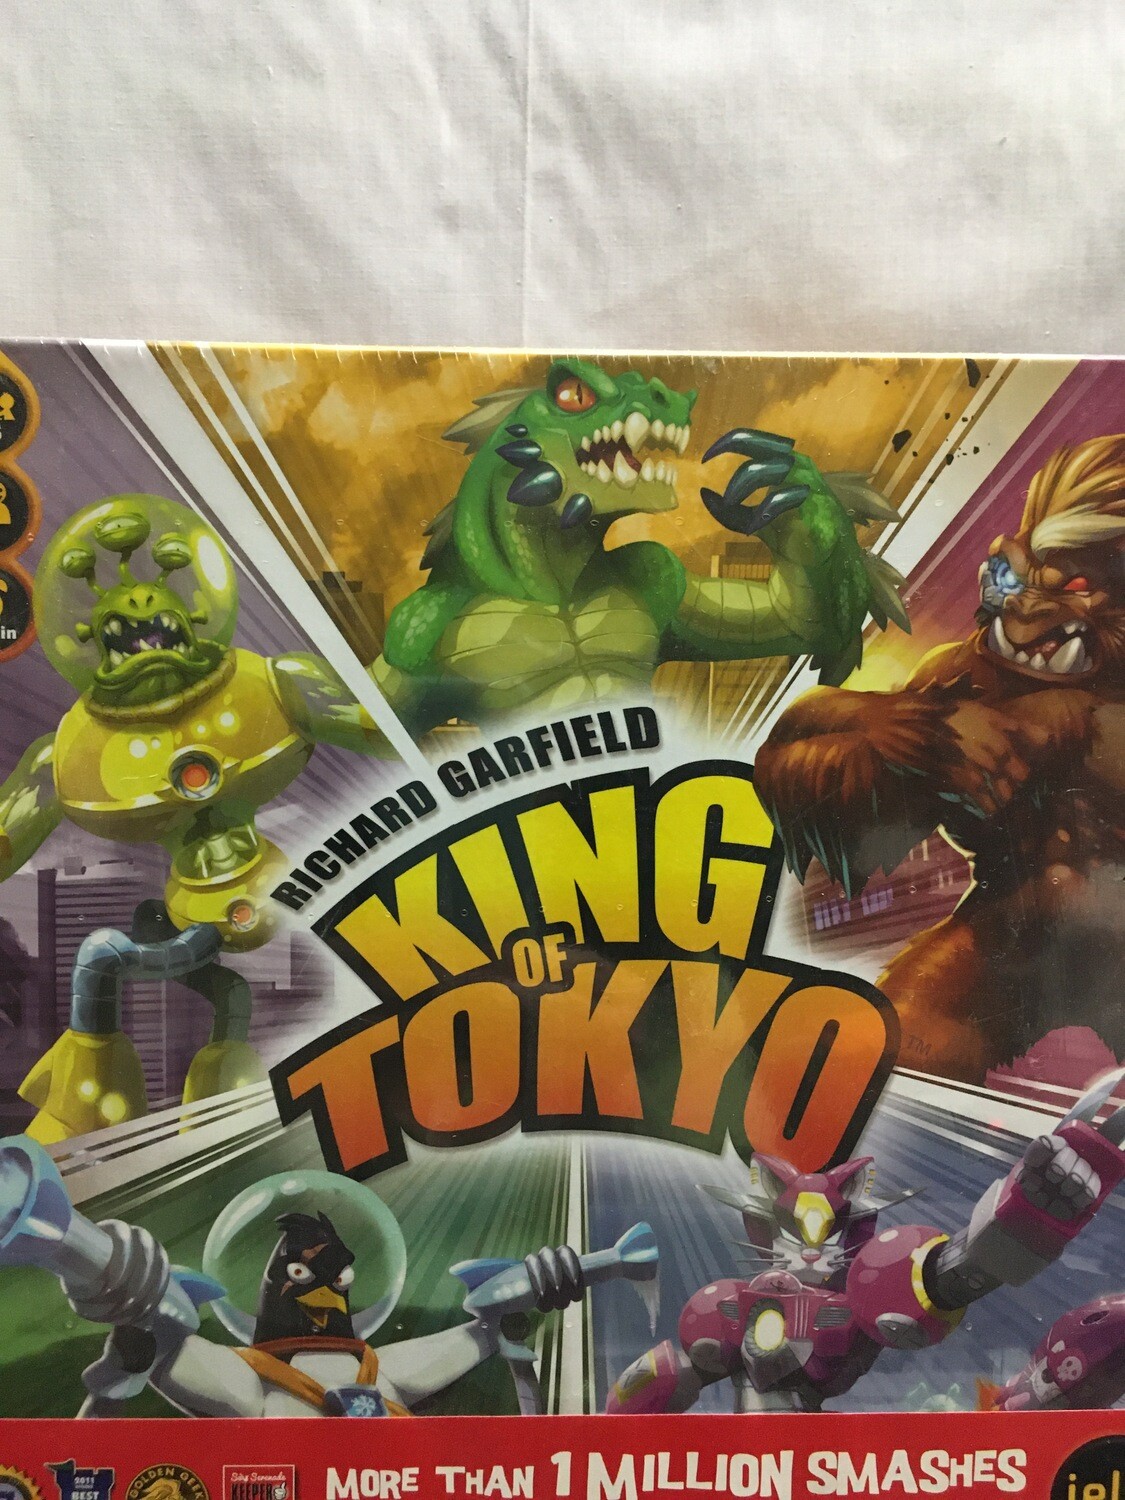 King of Tokyo - Board Game - 2-6 players ages 8 and up